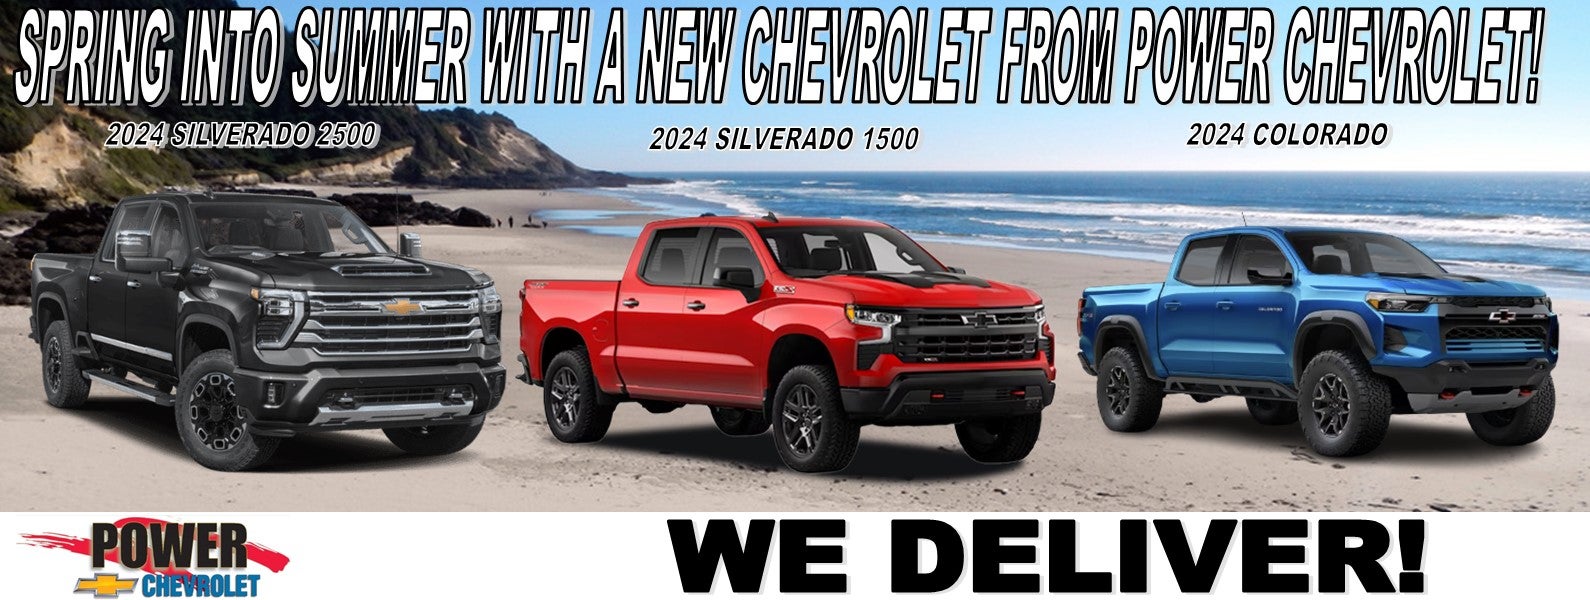 SPRING INTO SUMMER IN A NEW CHEVROLET